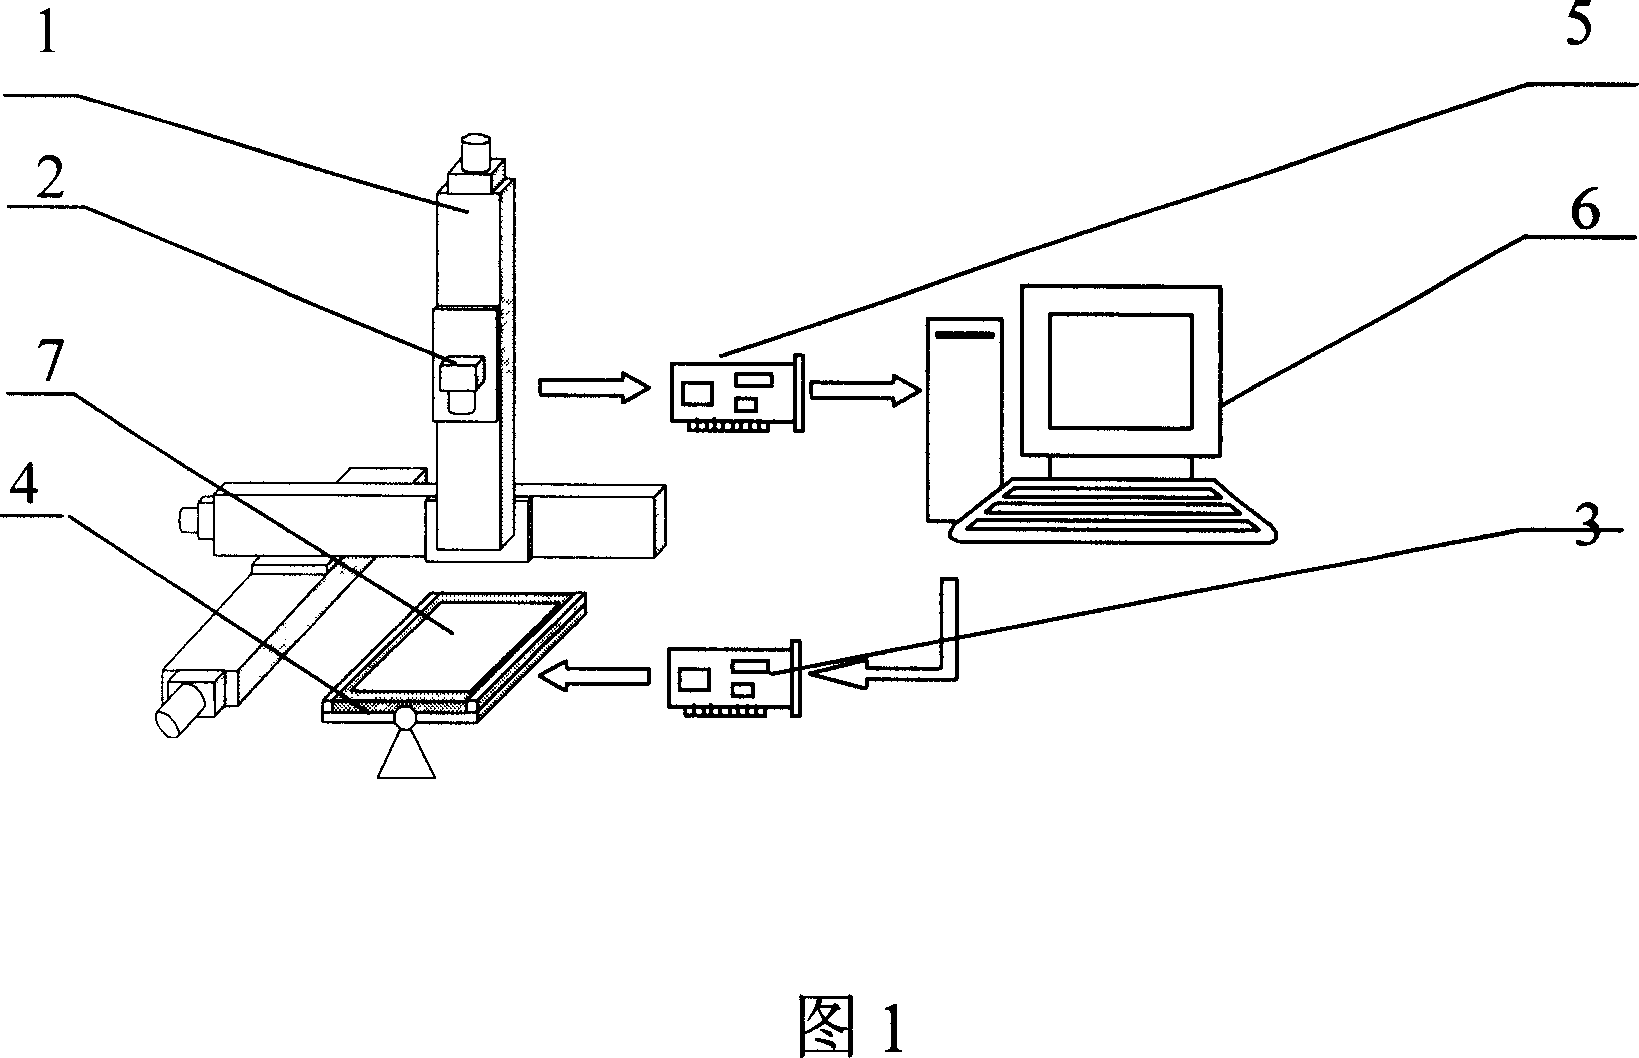 Machine vision based LCD spot flaw detection method and system